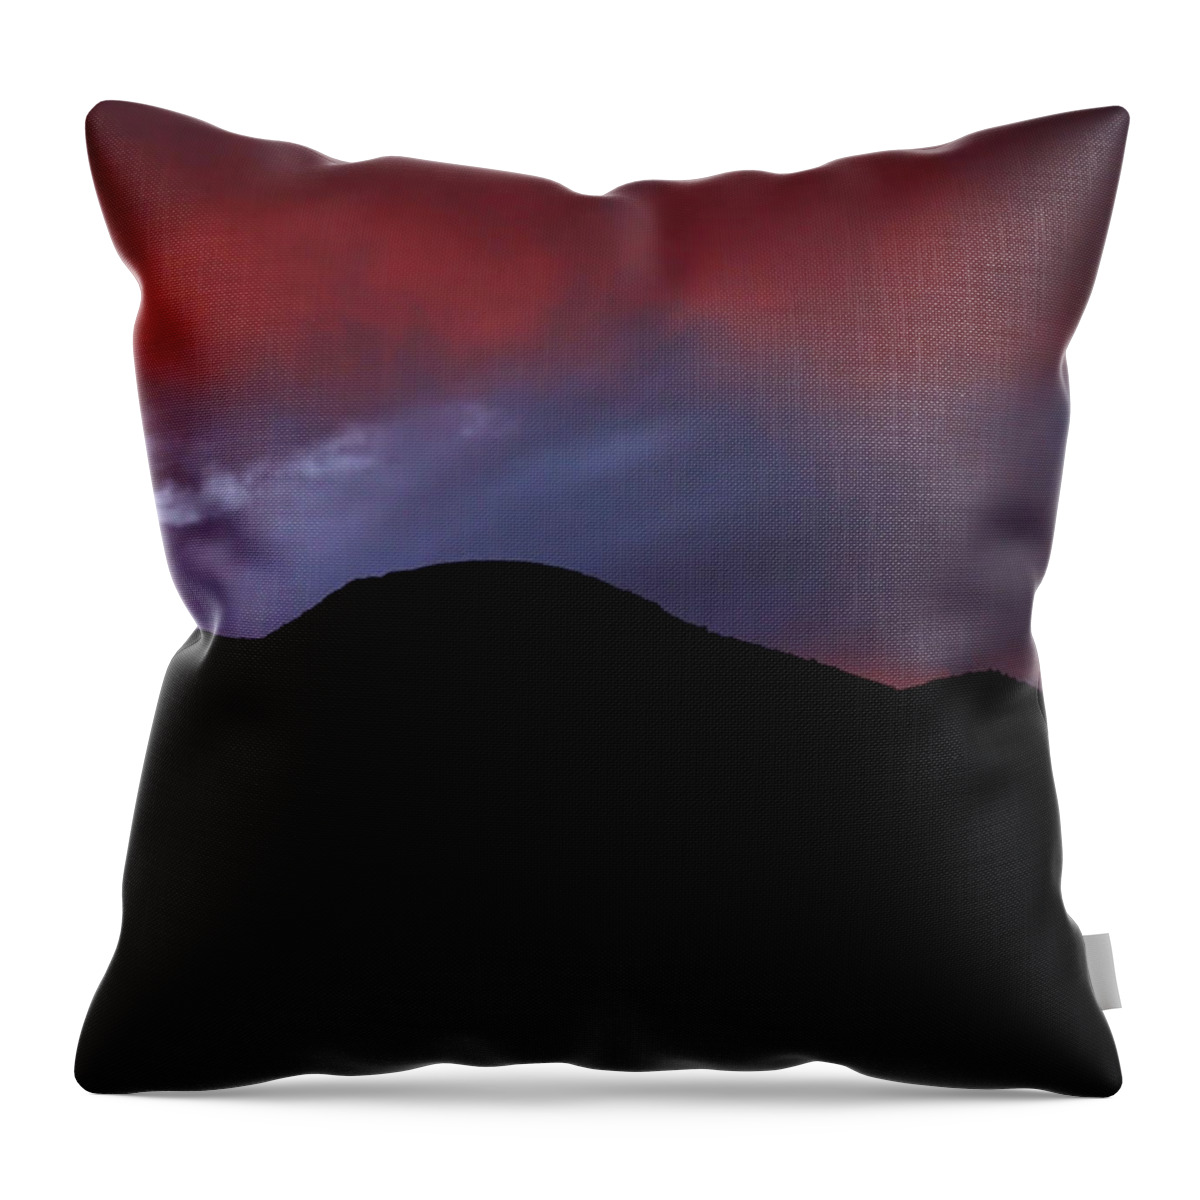 Volcanic Sky Throw Pillow featuring the photograph Volcanic Sky by Kandy Hurley